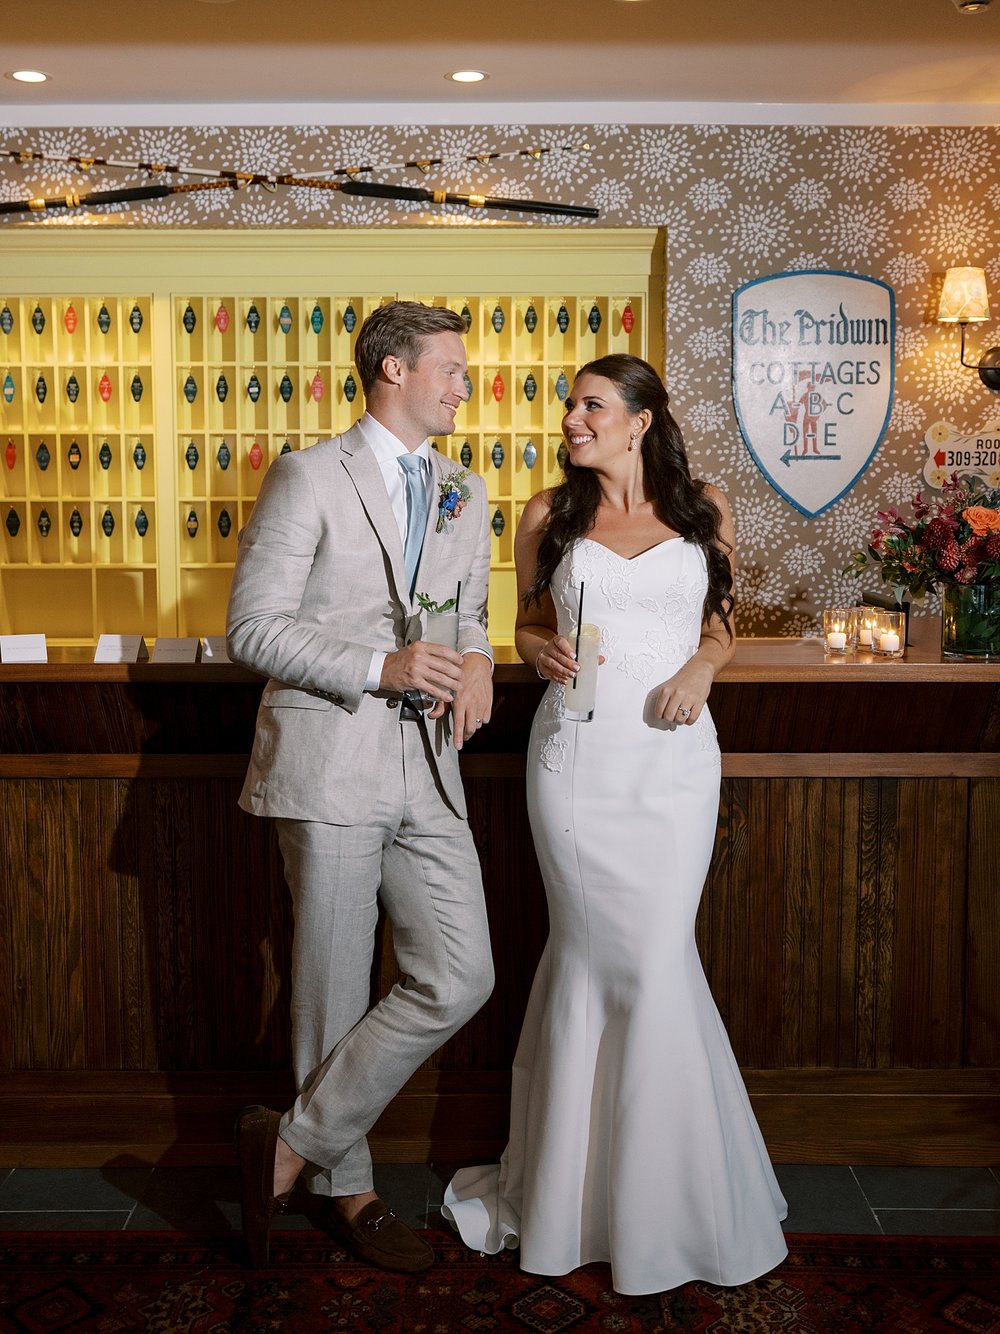 bride and groom pose against front desk of the Pridwin